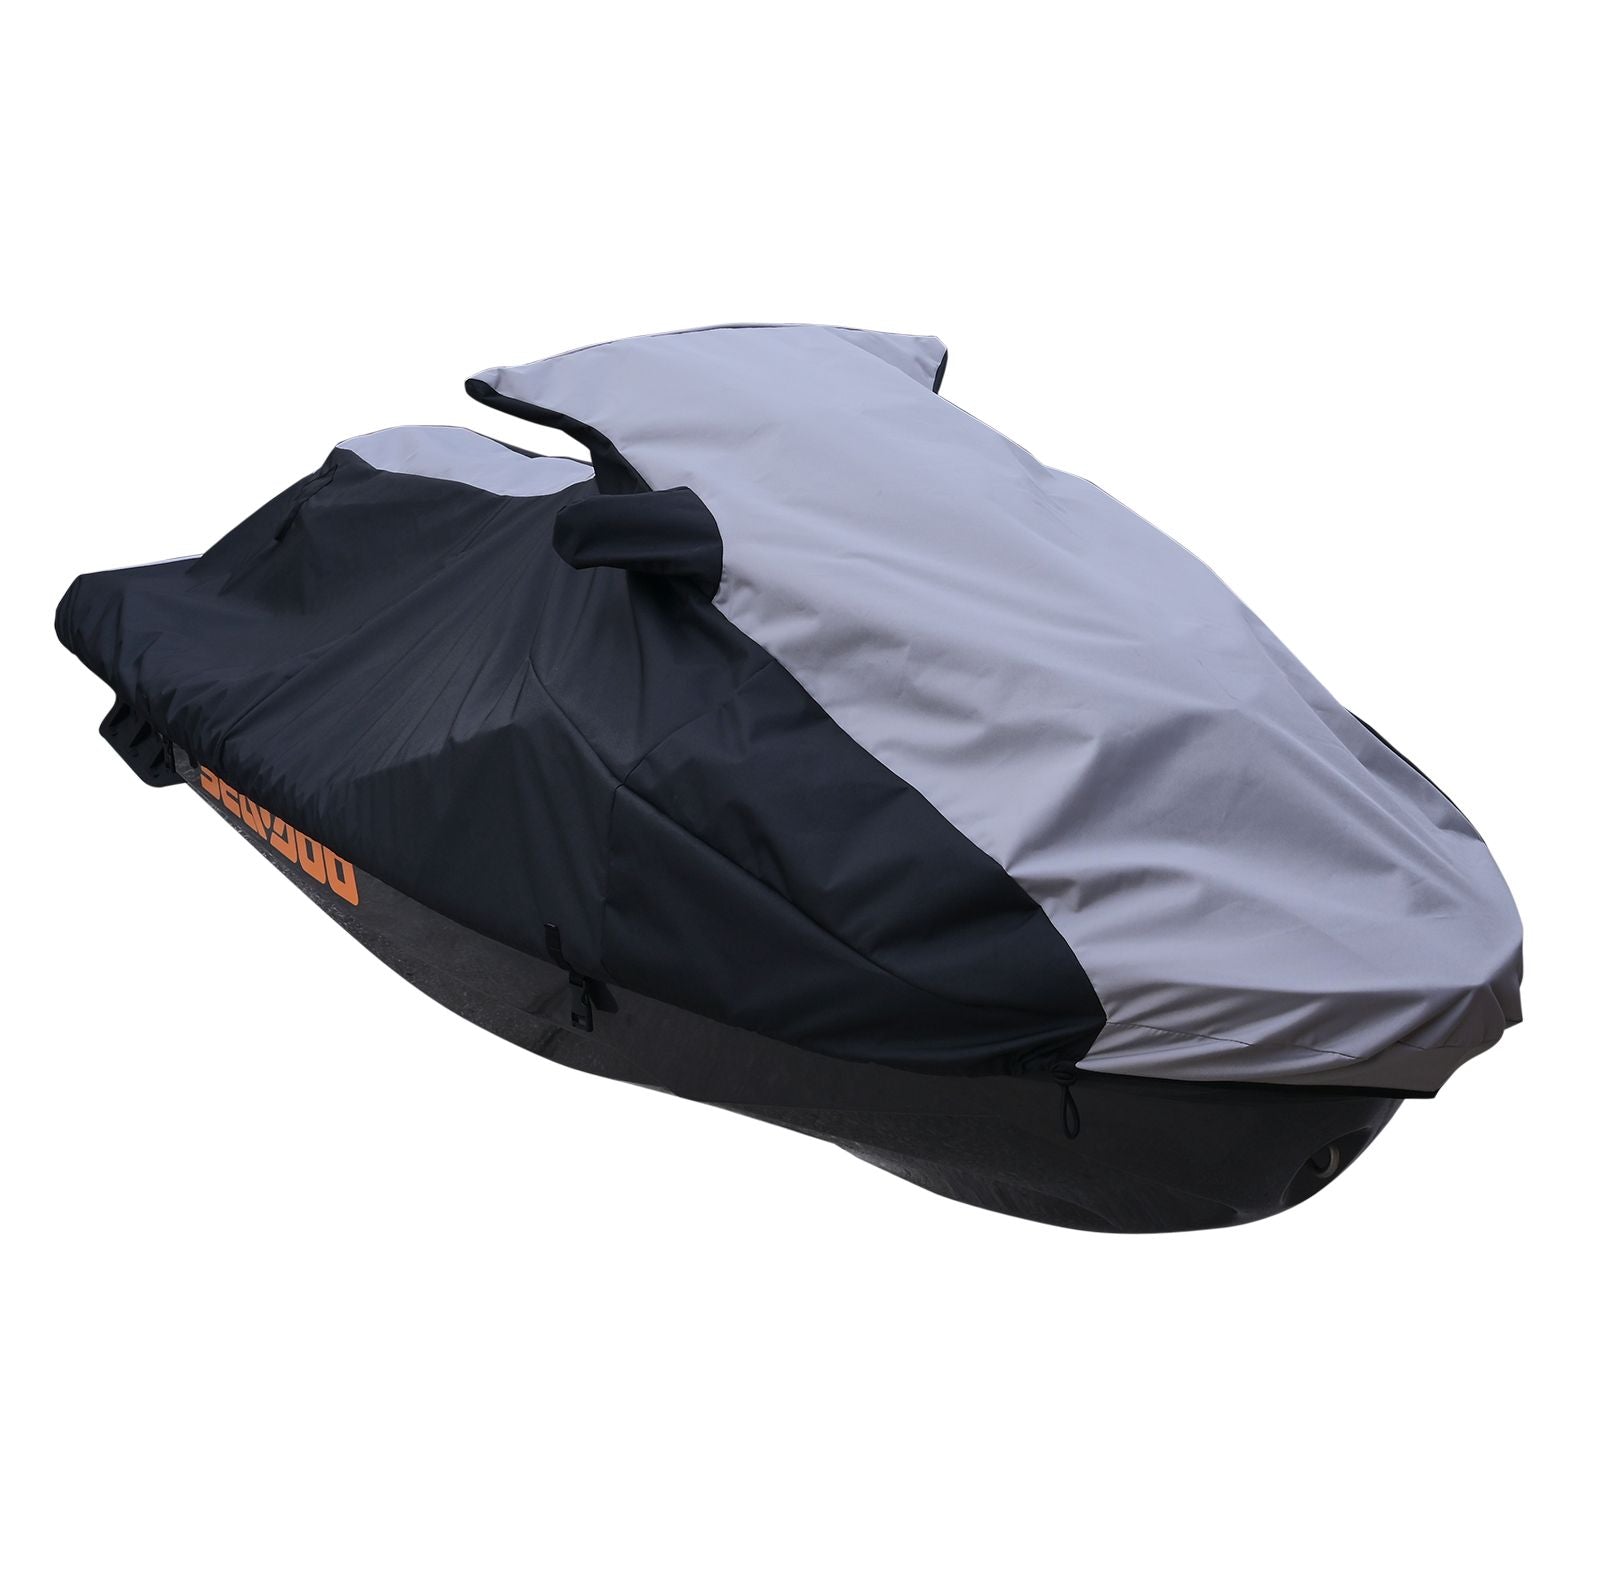 Trailerable Storage cover with vents for Sea-Doo 1996-2002 GTX (except 2002 4Tec)/ 1997 GTI